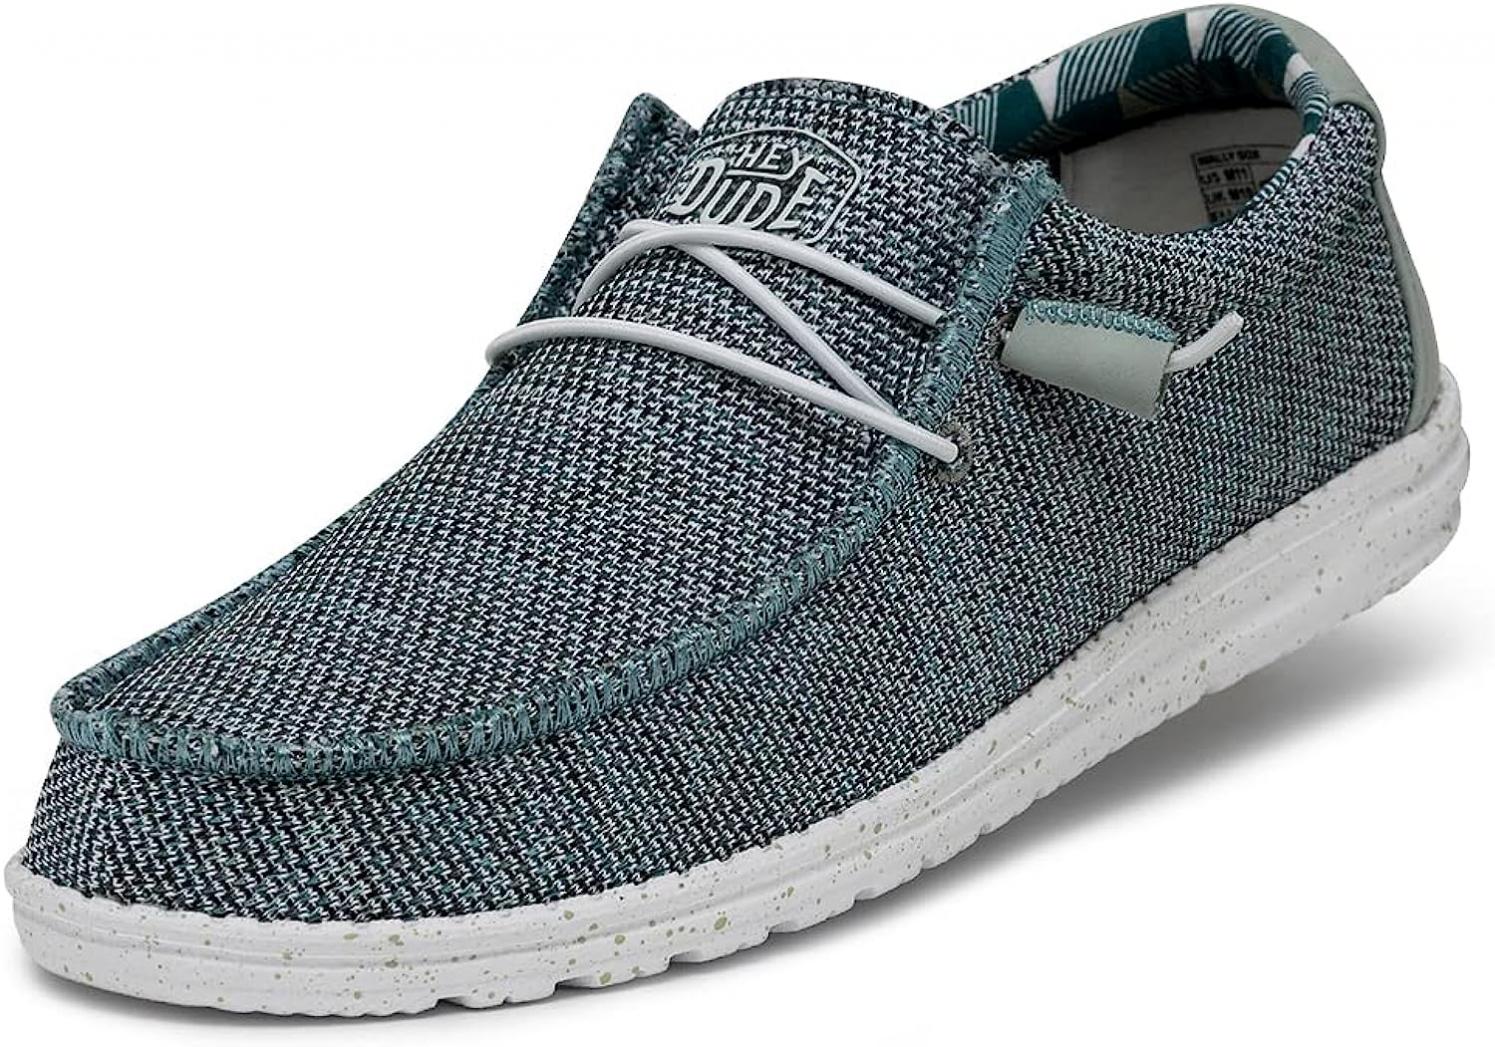 Hey Dude Men's Wally Sox Ice Grey Size 10| Men's Loafers | Men's Slip On Shoes | Comfortable & Light-Weight